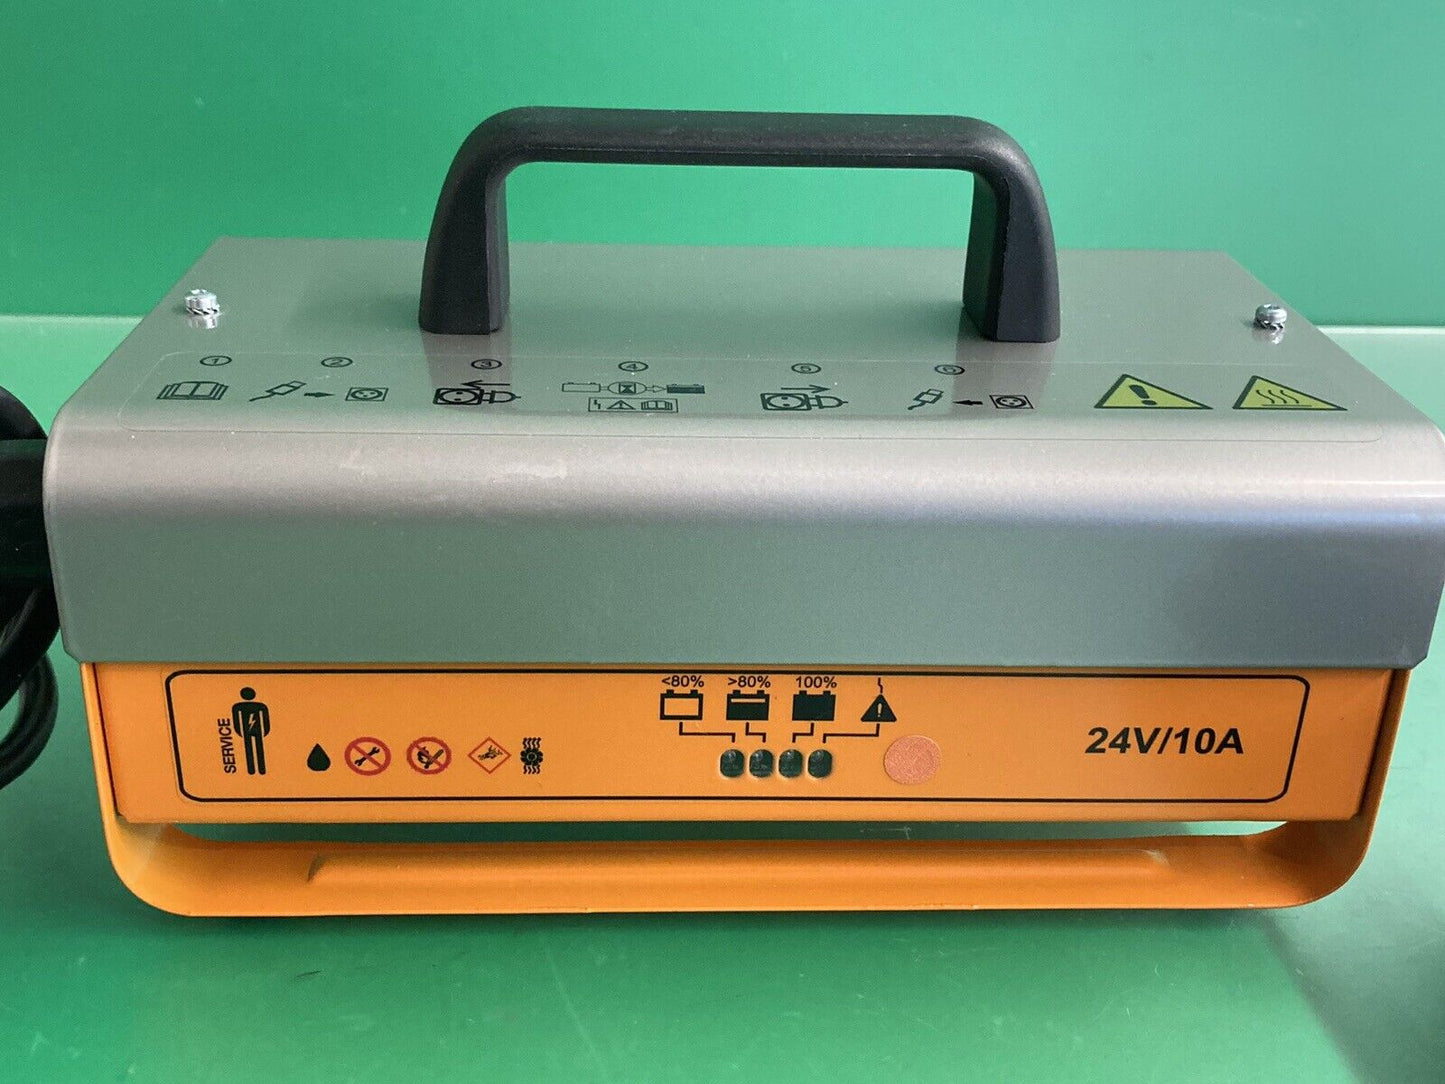 Latest Style Sunrise Quickie 24V 10A Battery Charger for Powerchair 250647 #J491